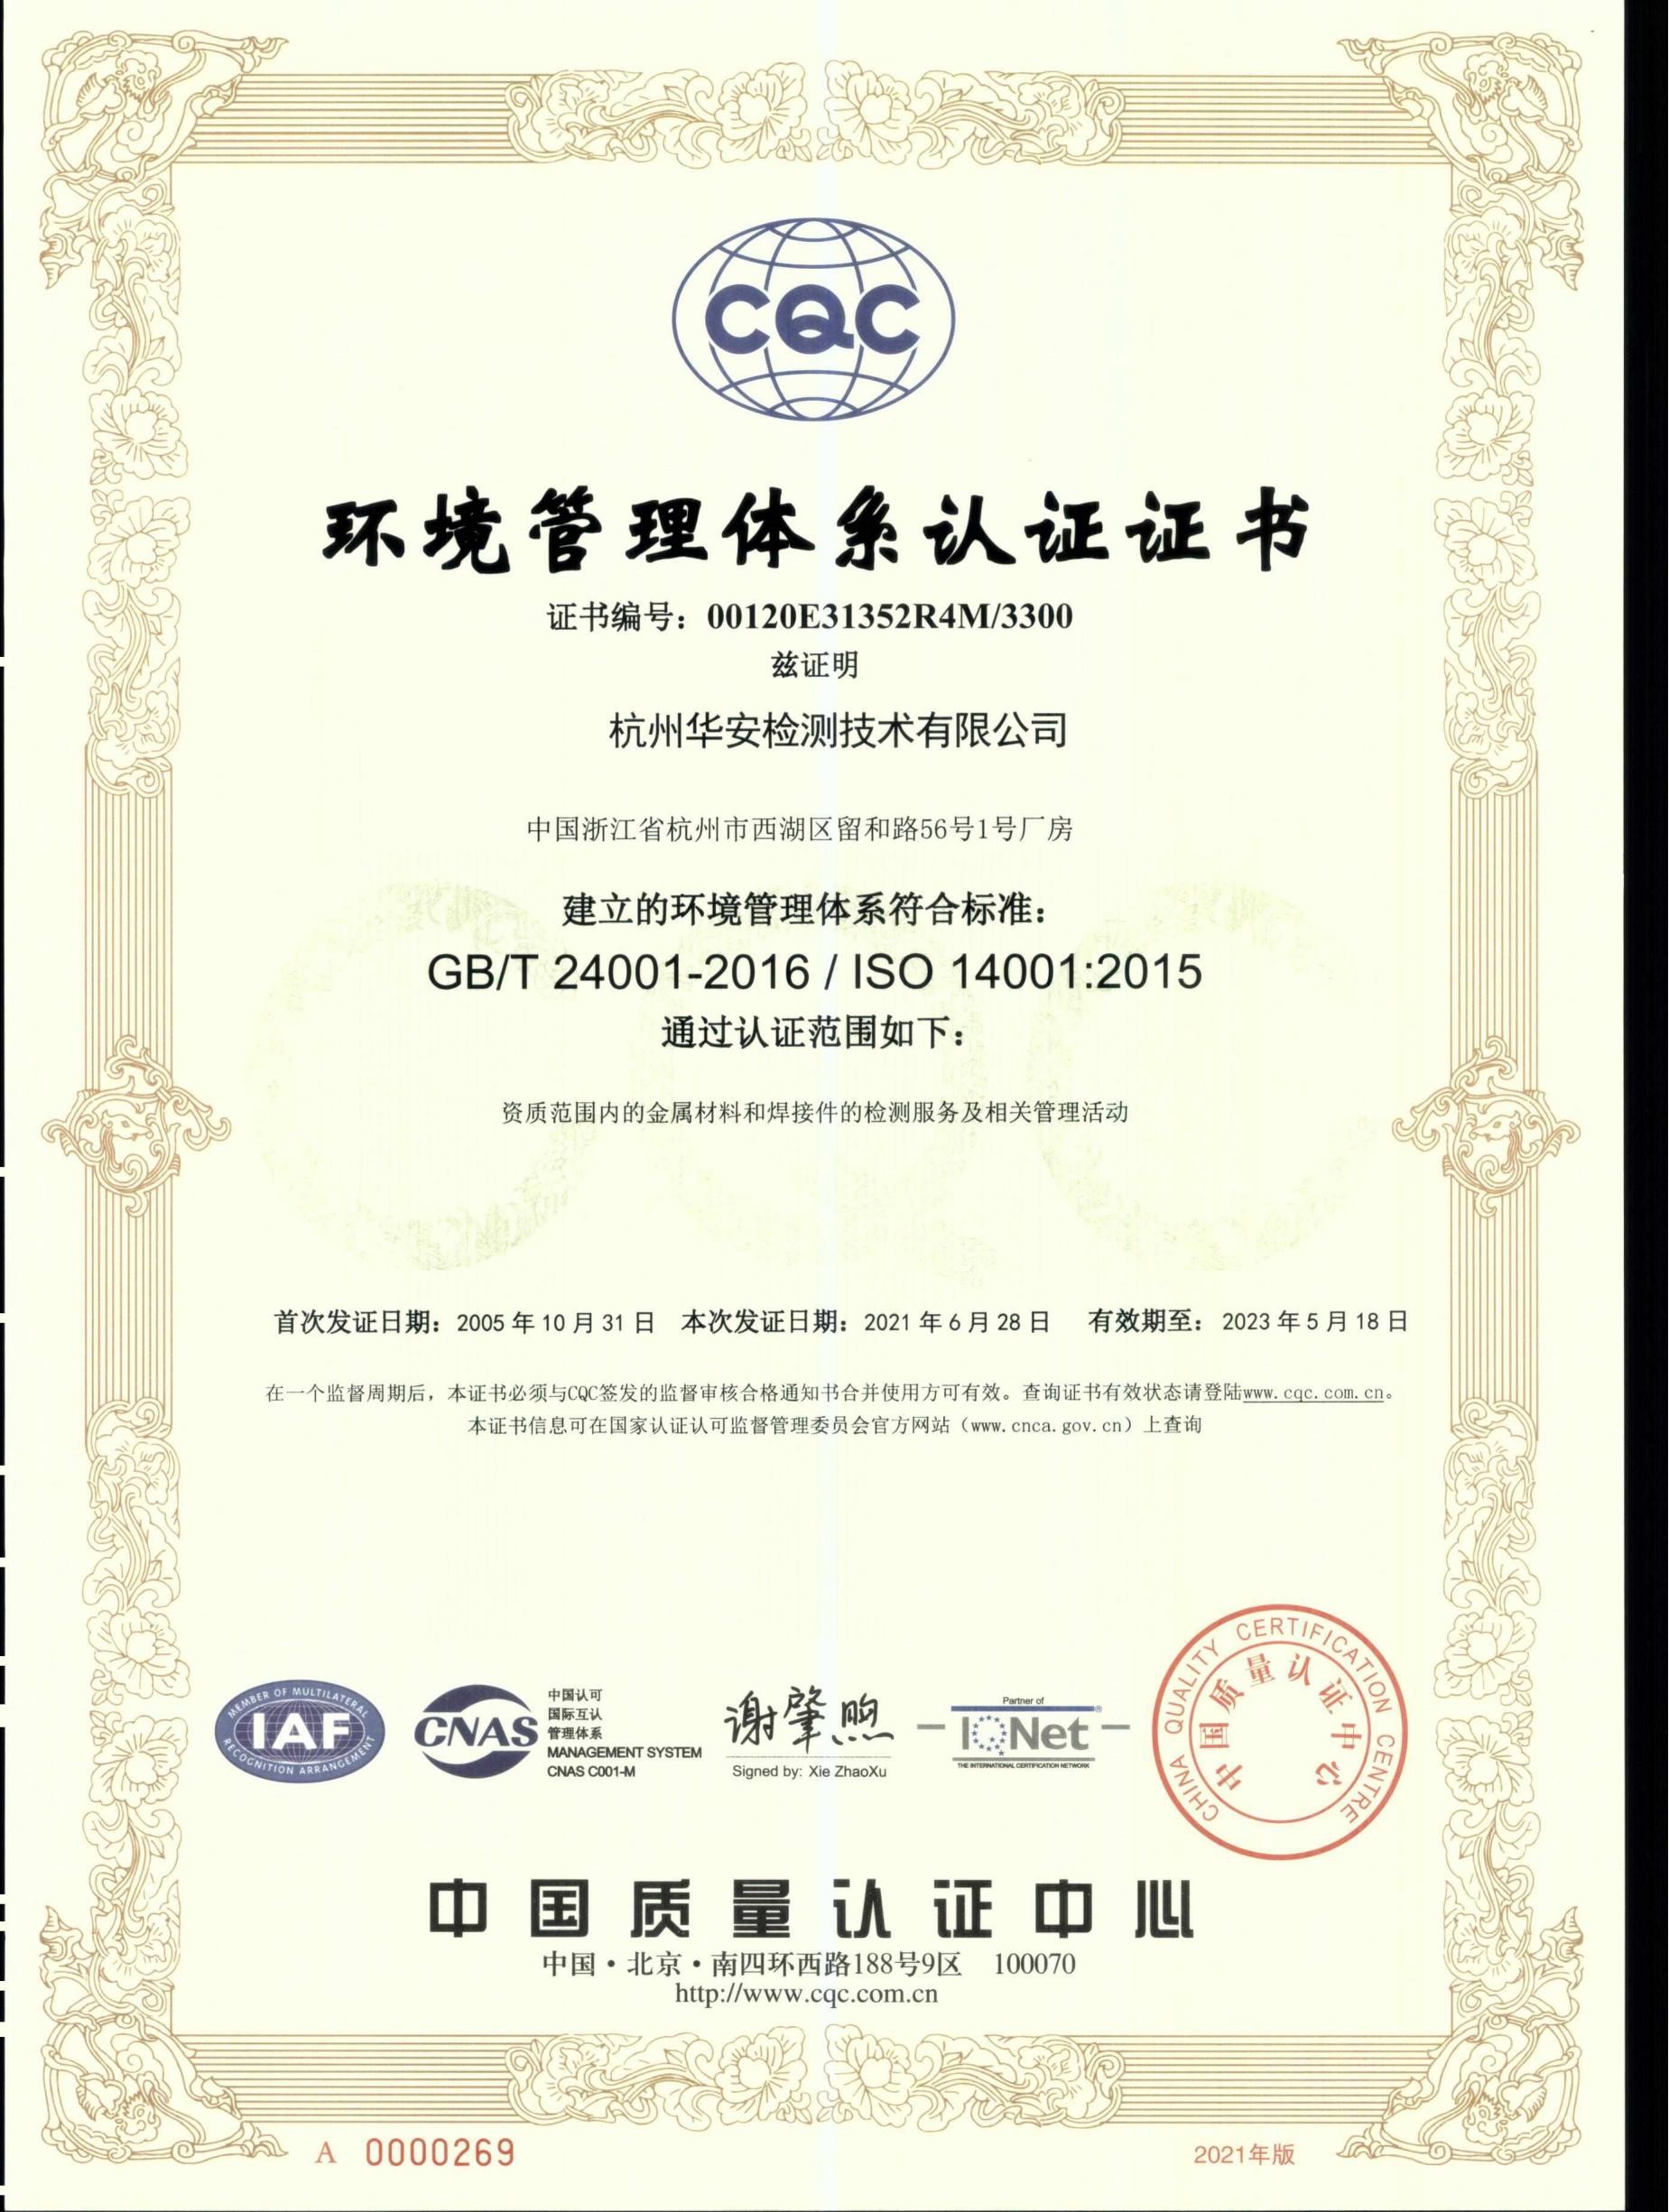 Environmental management system certification GB/T 24001-2016 | ISO 14001:2015